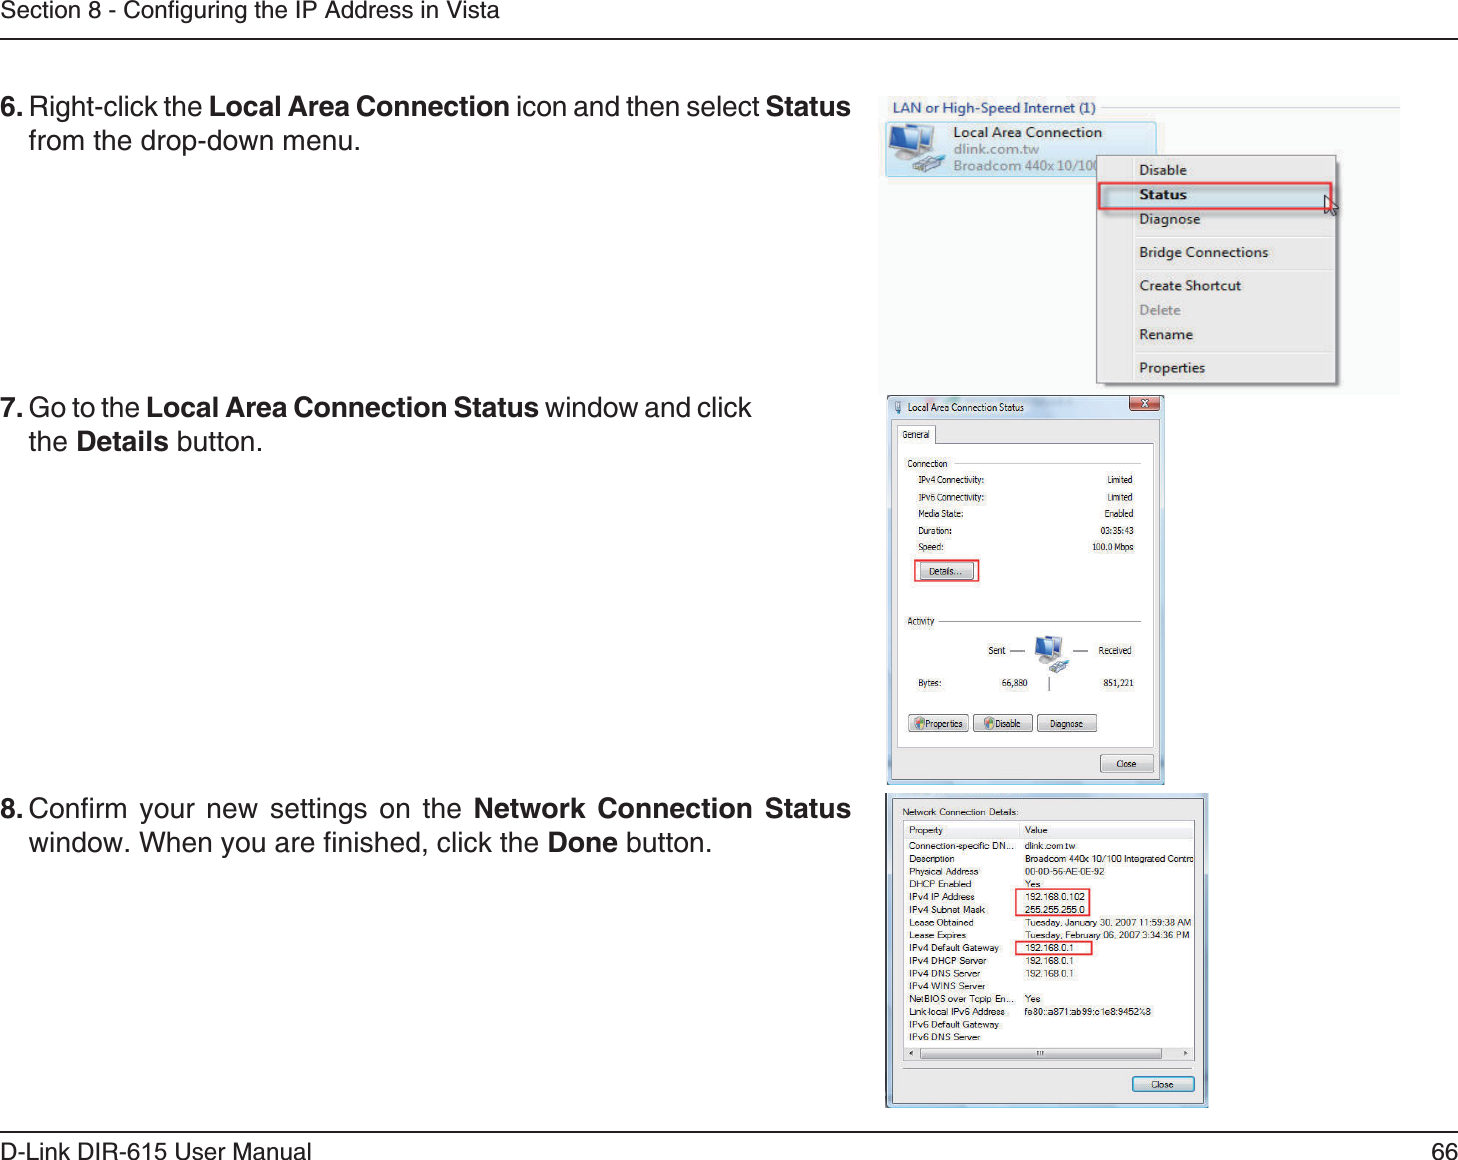 66D-Link DIR-6 User ManualSection 8 - Configuring the IP Address in Vista6. Right-click the  icon and then select  from the drop-down menu. 7. Go to the window and click the  button. 8. Confirm your new settings on the   window. When you are finished, click the  button. 